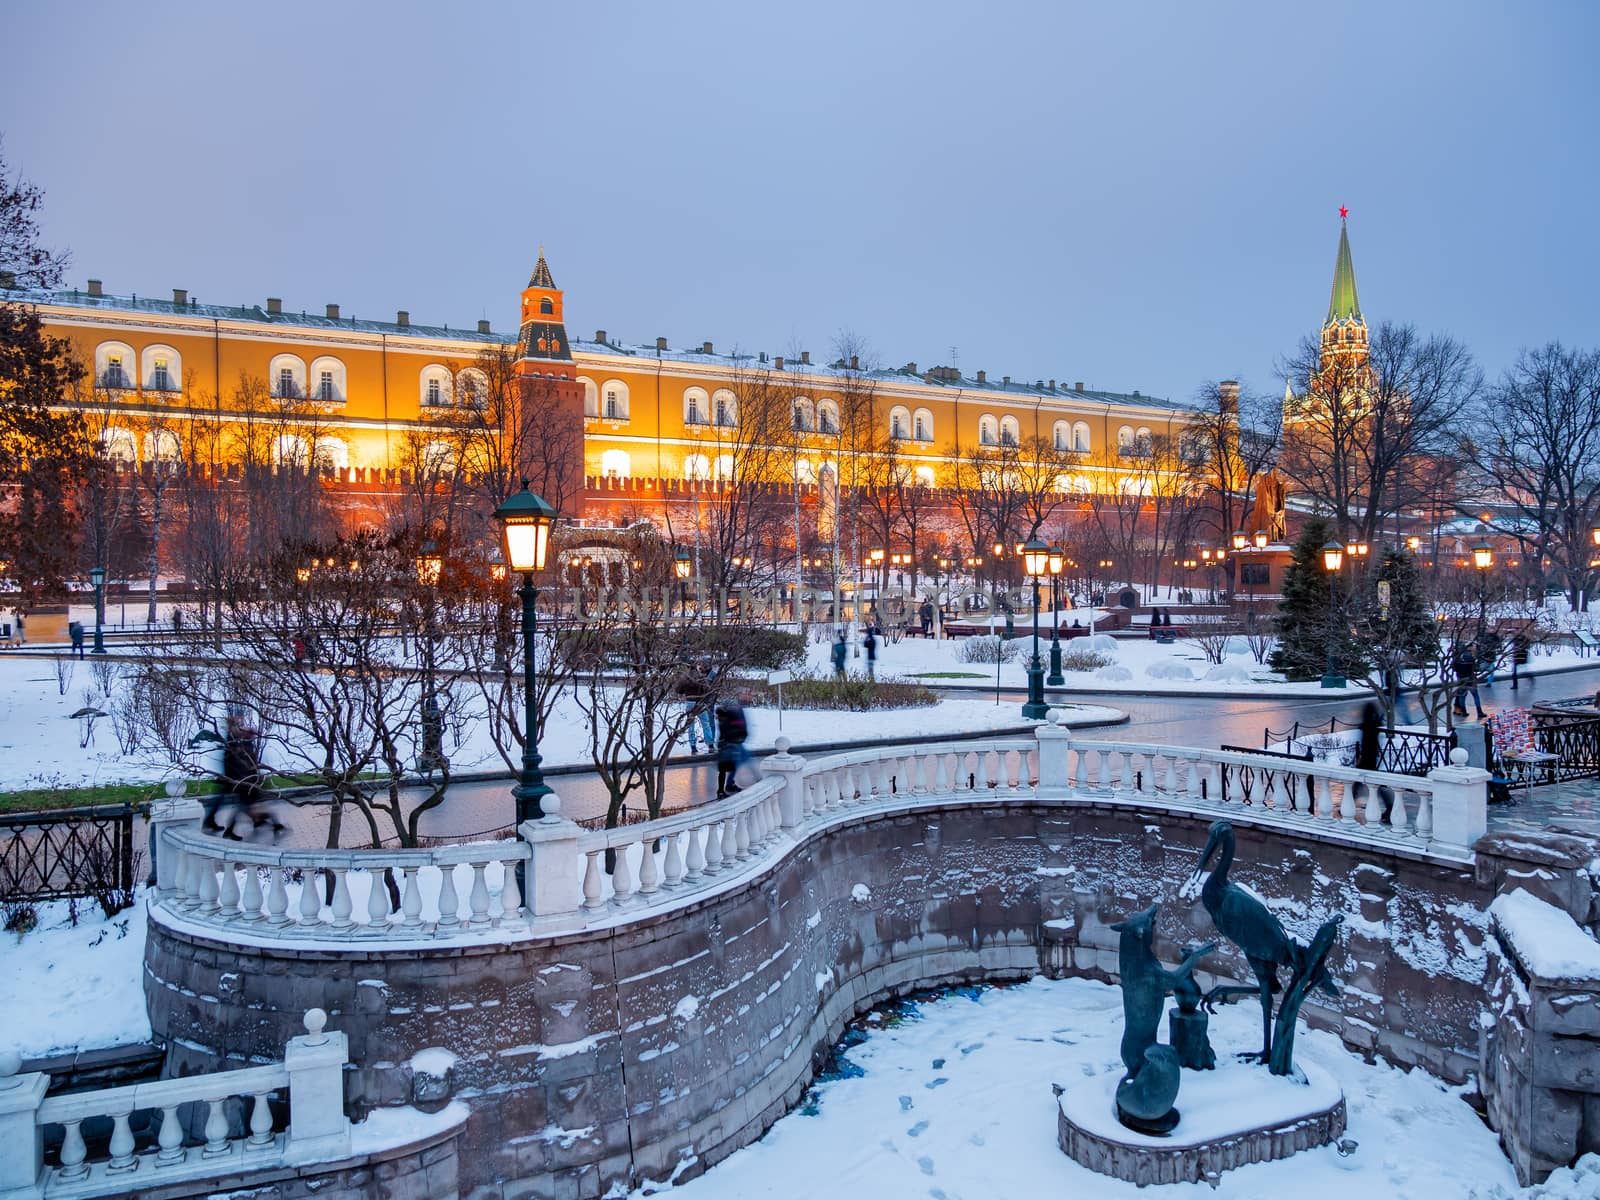 Kremlin towers and Alexander Gardens at winter evening. Moscow, Russia.